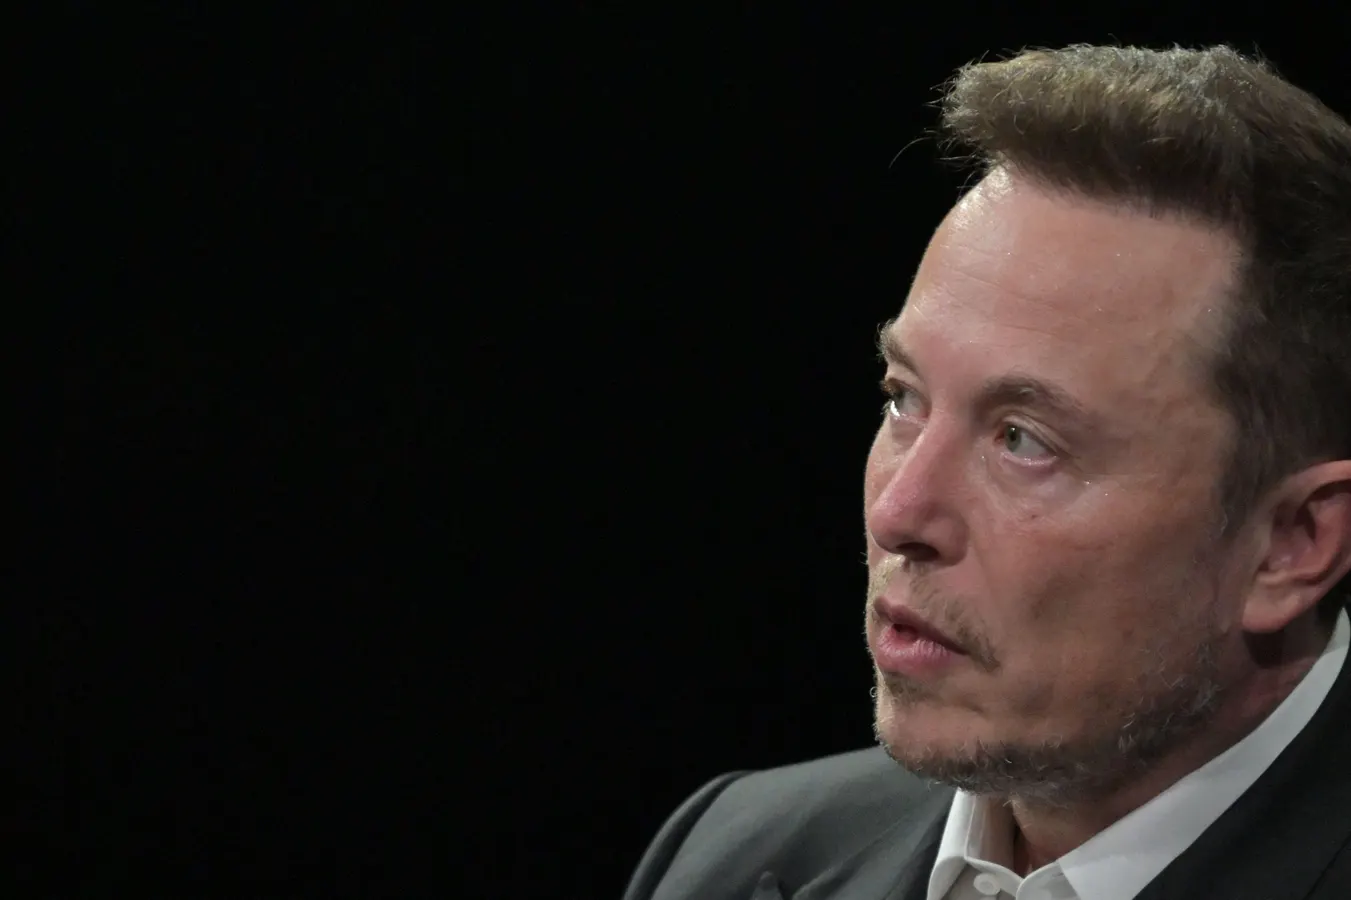 Elon Musk slams Australian PM over X's court-ordered content removal (Credits: Getty Images)